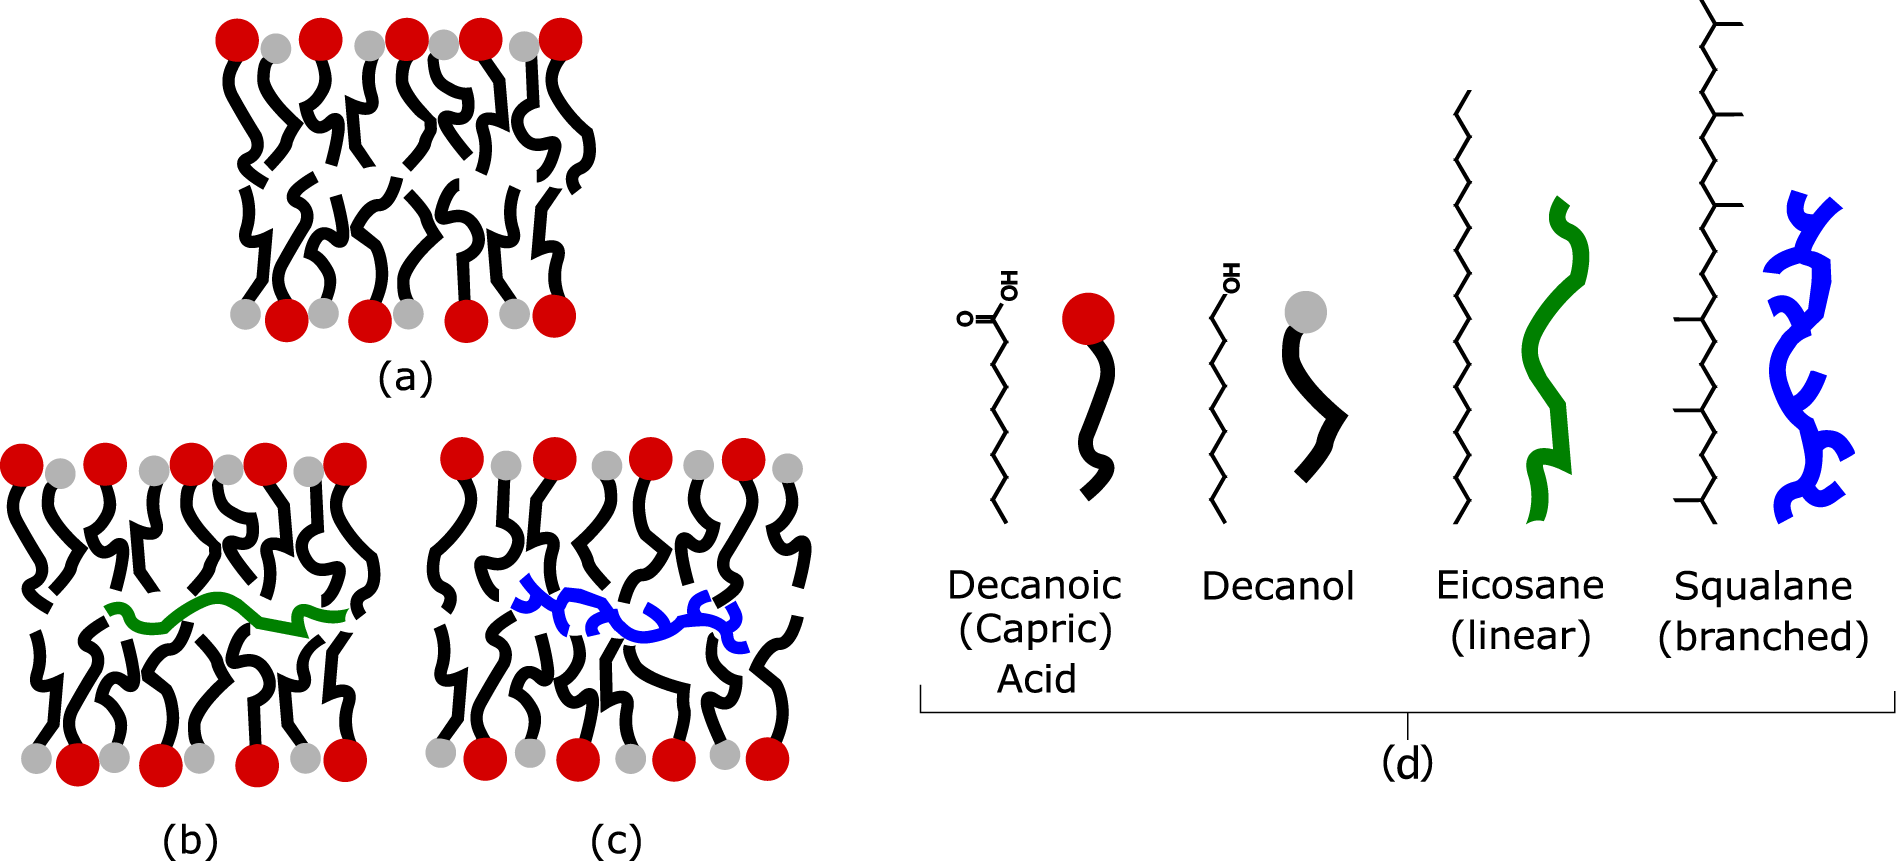 Alkanes increase the stability of early life membrane models under extreme  pressure and temperature conditions | Communications Chemistry